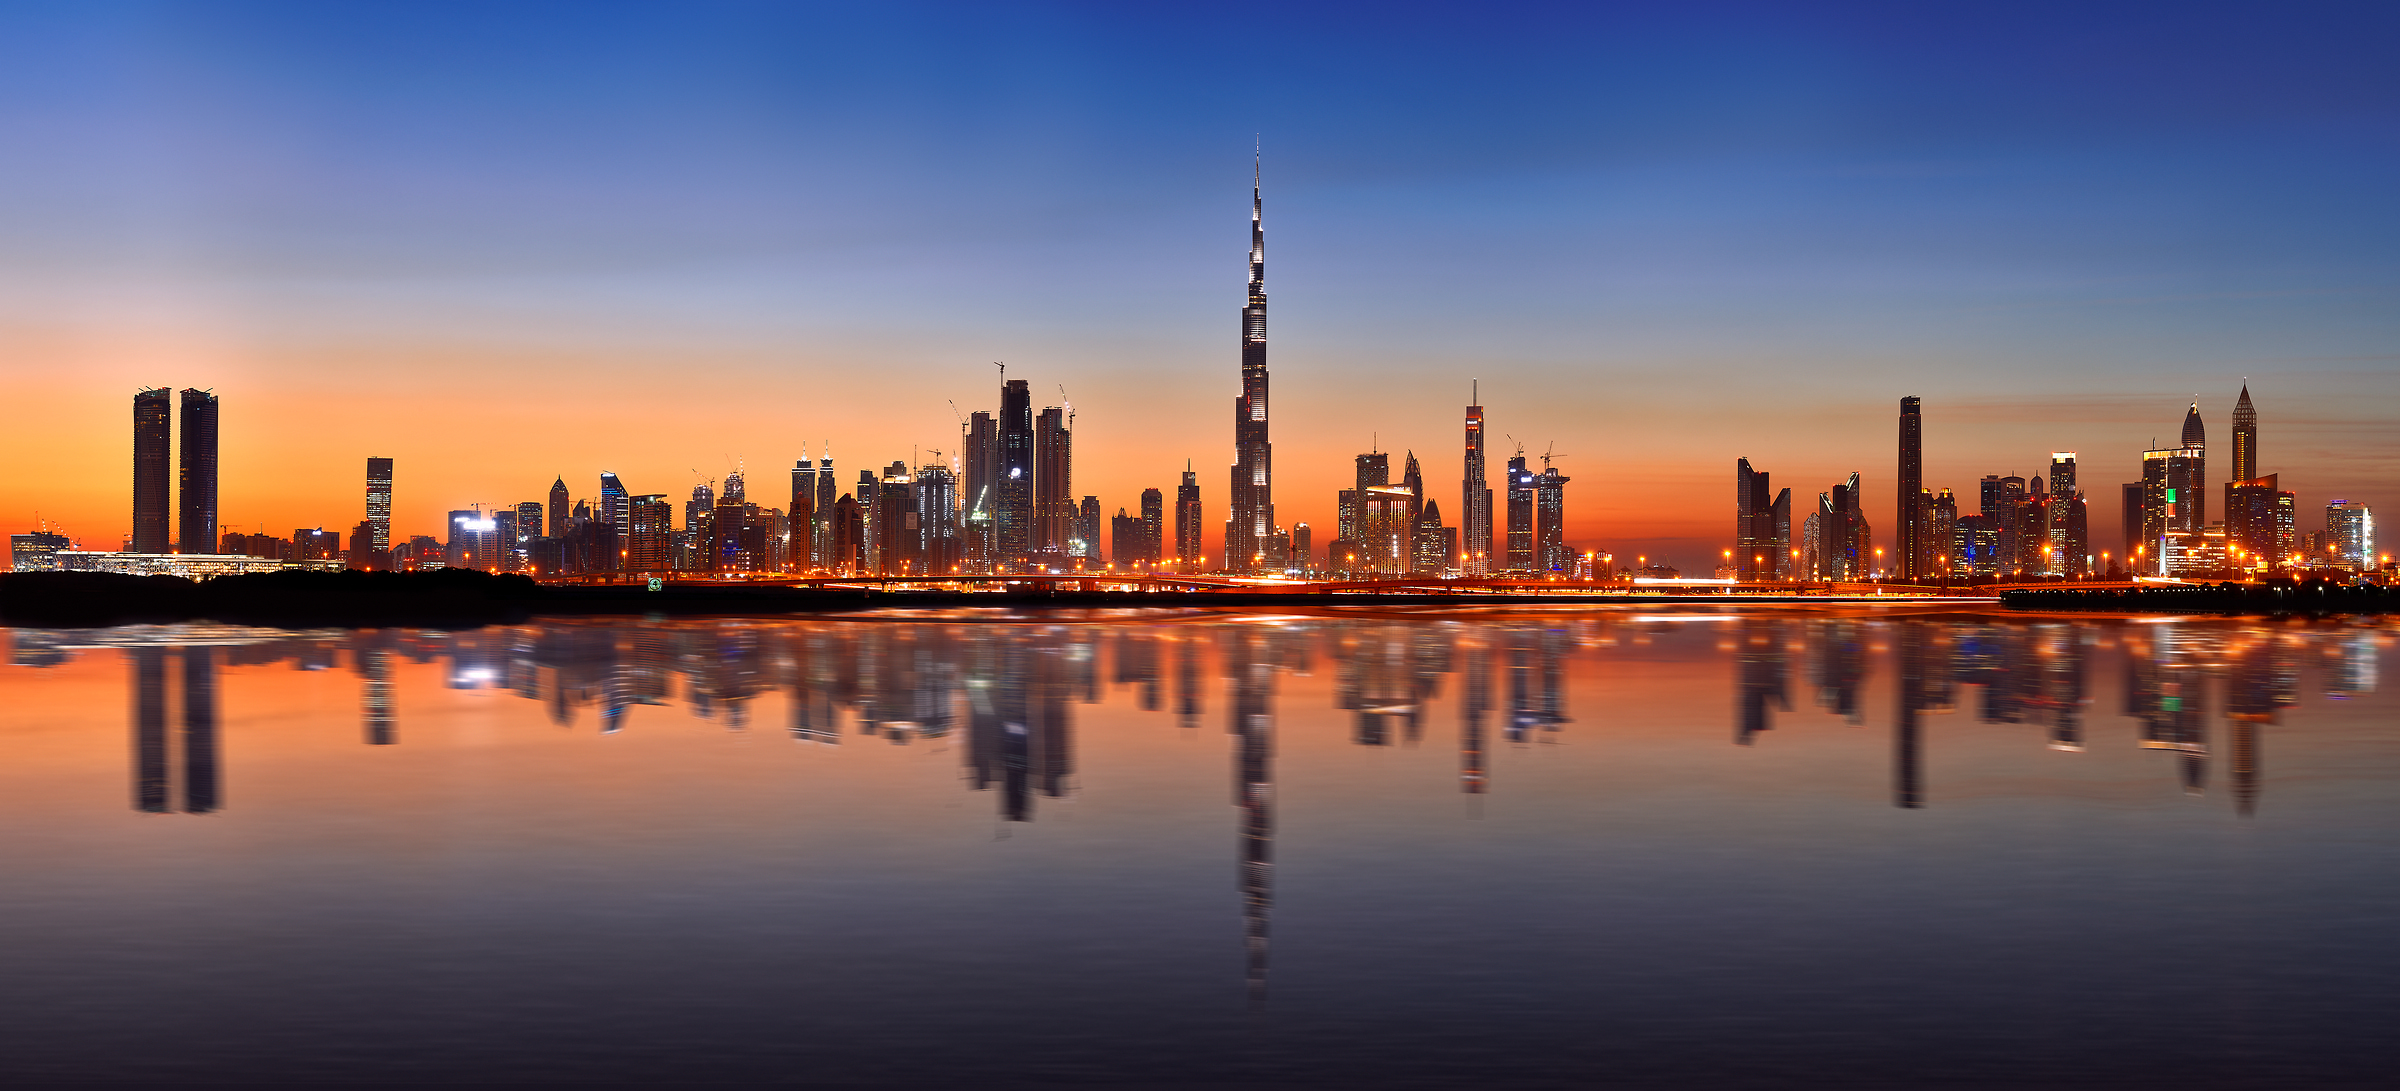 273 megapixels! A very high resolution, large-format VAST photo print of the Dubai skyline at sunset; cityscape photograph created by Chris Collacott in Dubai, United Arab Emirates.